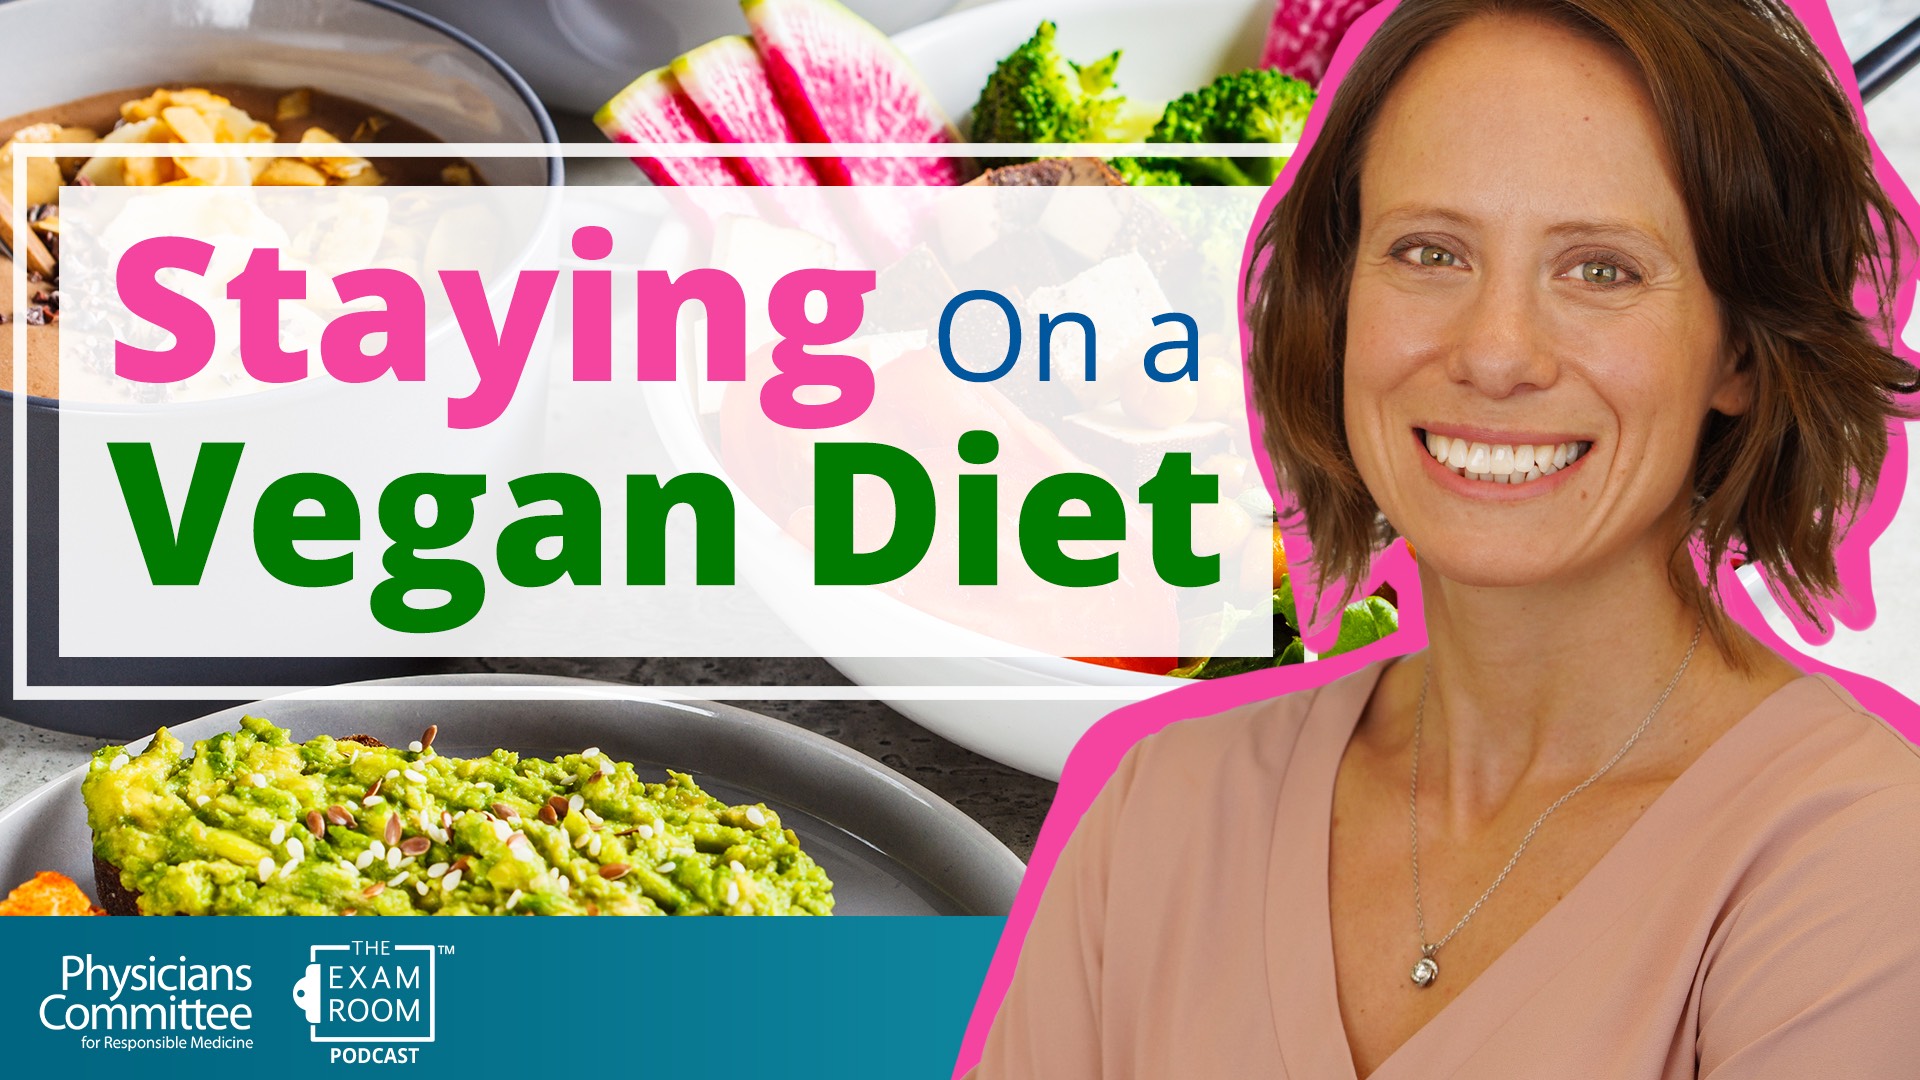 How to Stay on a Vegan Diet and Not Quit | Karen Smith, RD Live Q&A